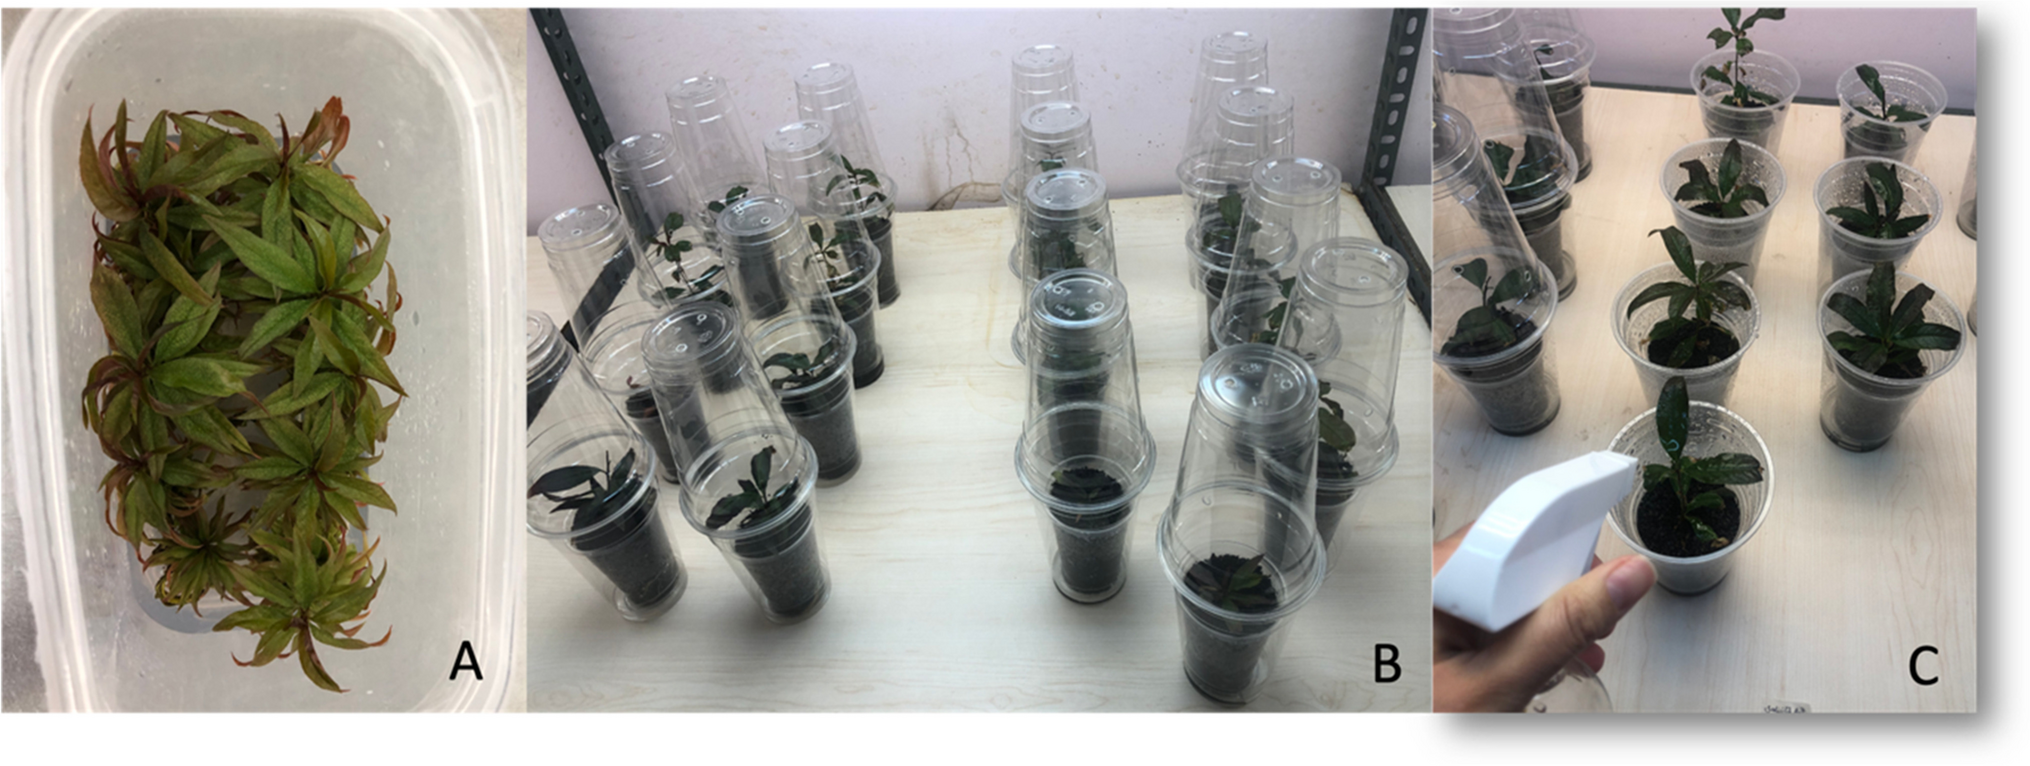 Effects of different healing agents on acclimatization success of in vitro rooted Garnem (Prunus dulcis × Prunus persica) rootstock